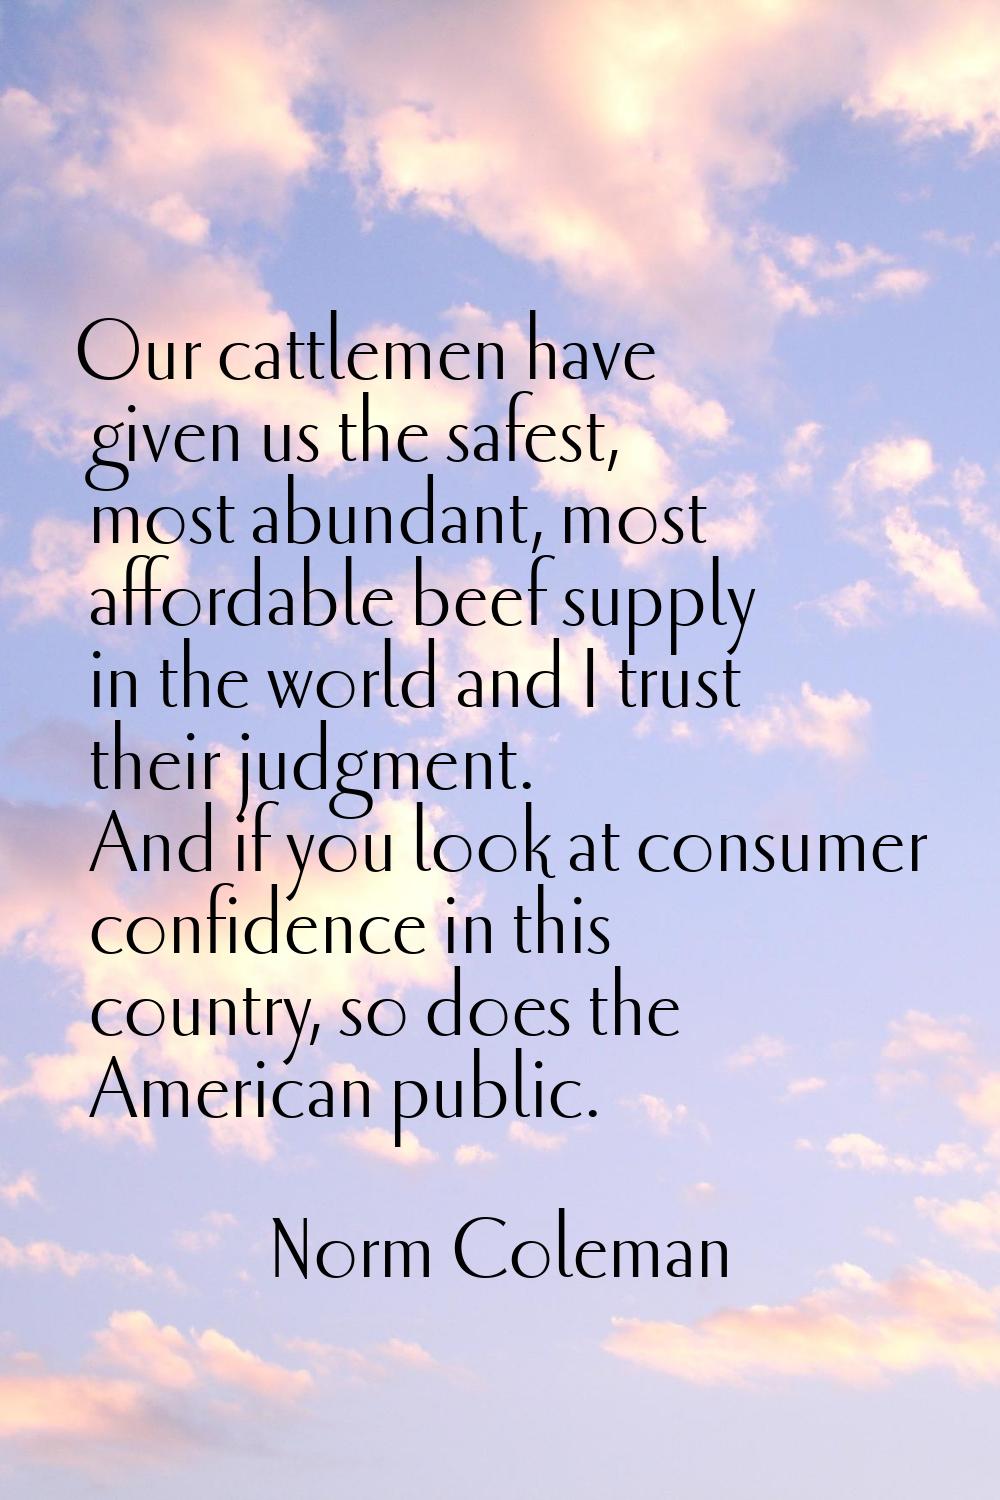 Our cattlemen have given us the safest, most abundant, most affordable beef supply in the world and